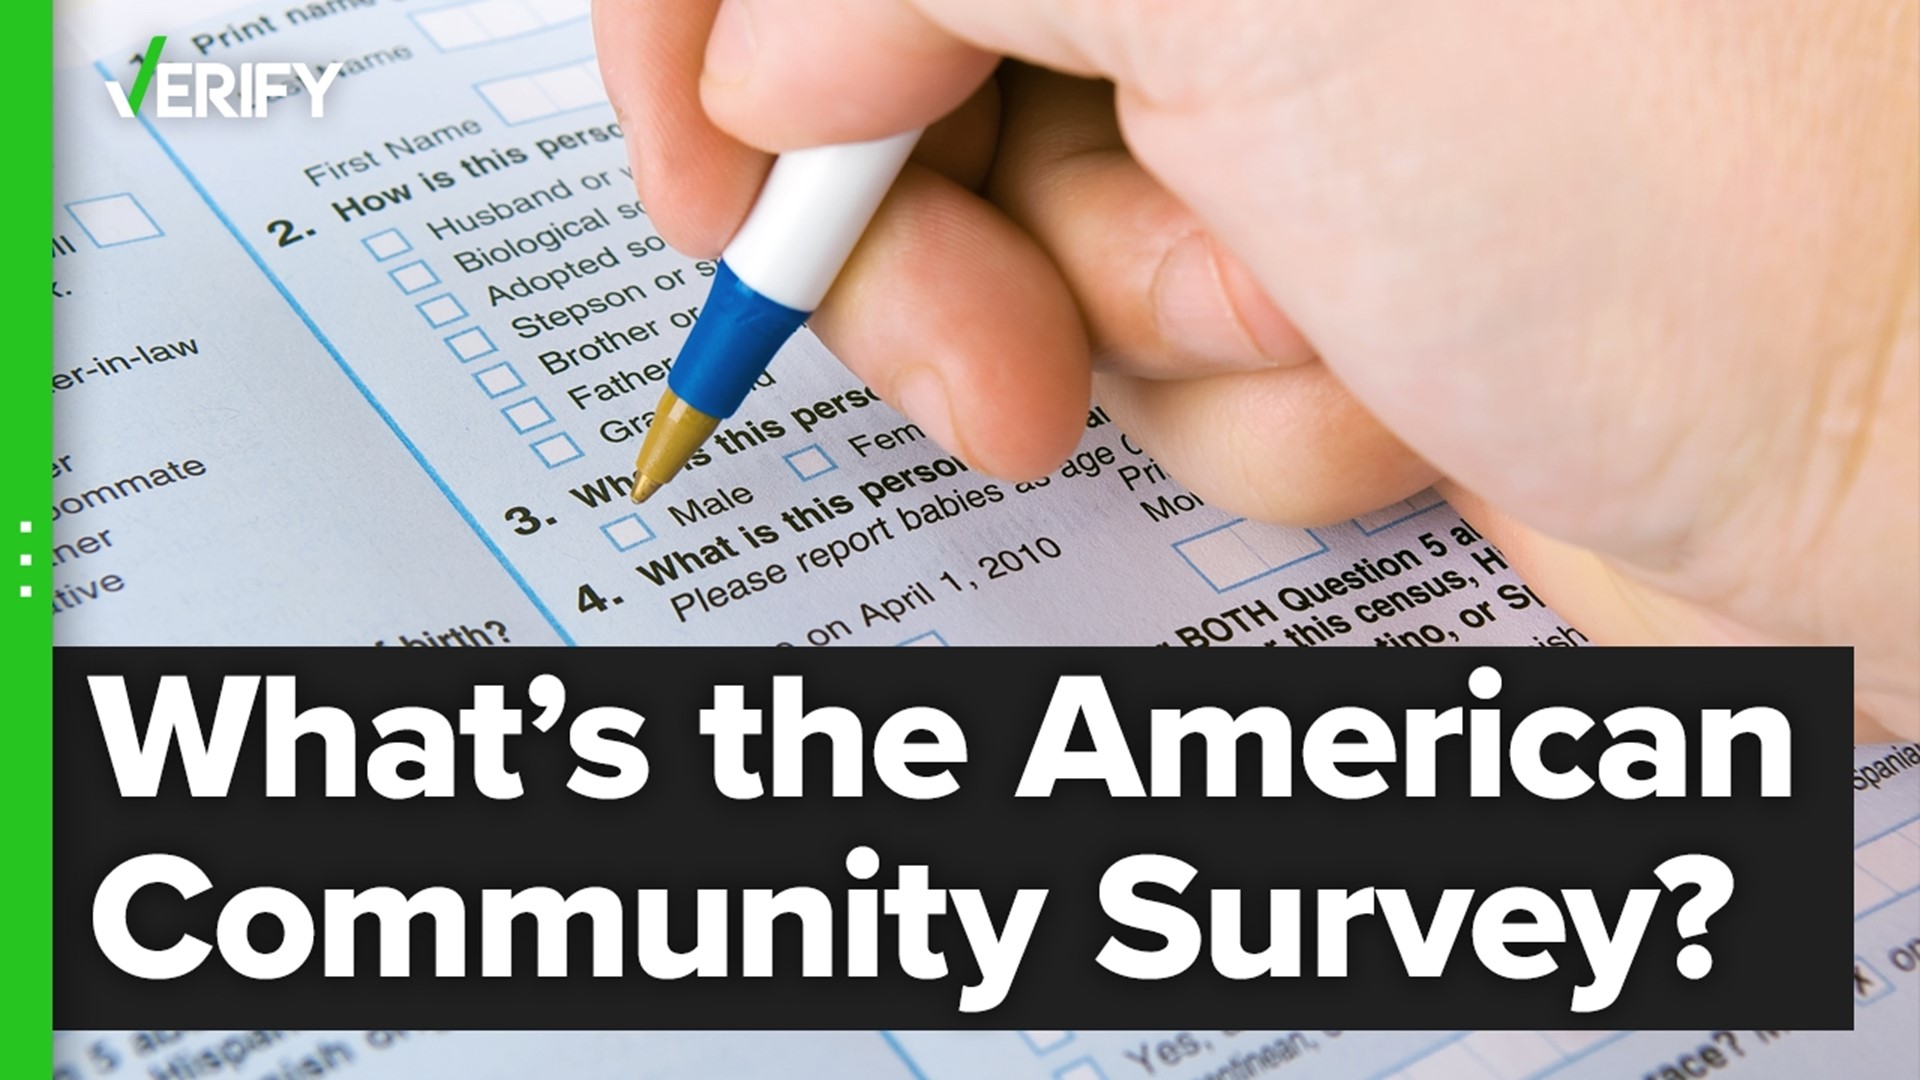 The American Community Survey is the nation’s largest household survey. Every year, the U.S. Census Bureau contacts over 3.5 million households to participate.